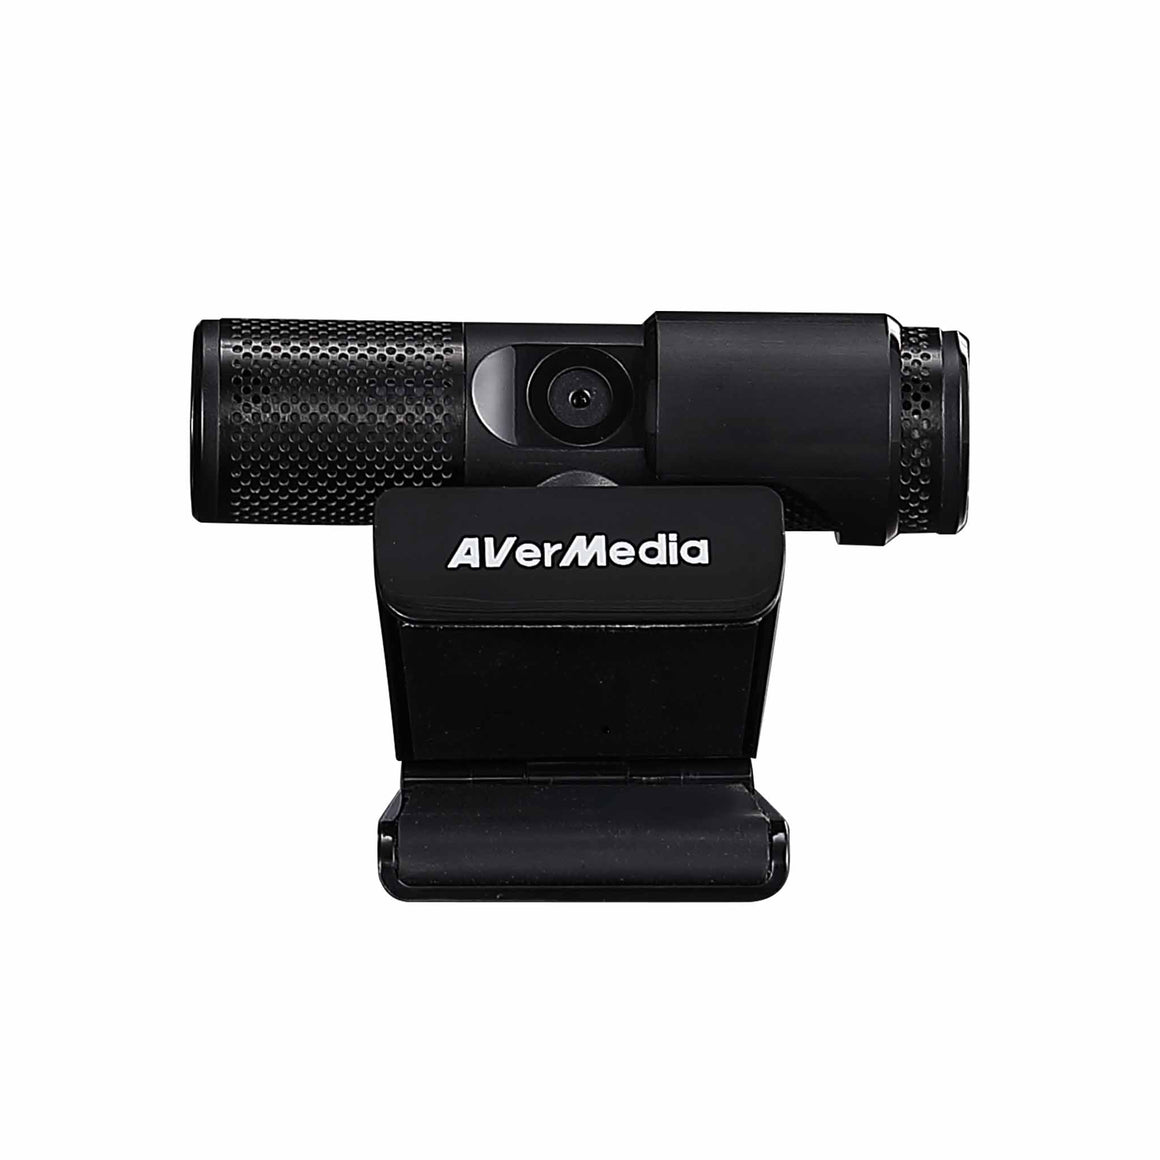 Avermedia Live Streamer CAM 313 is the best USB webcam easy to use plug and play that records in Full HD for podcasting, streaming, and gaming for desktop and laptop